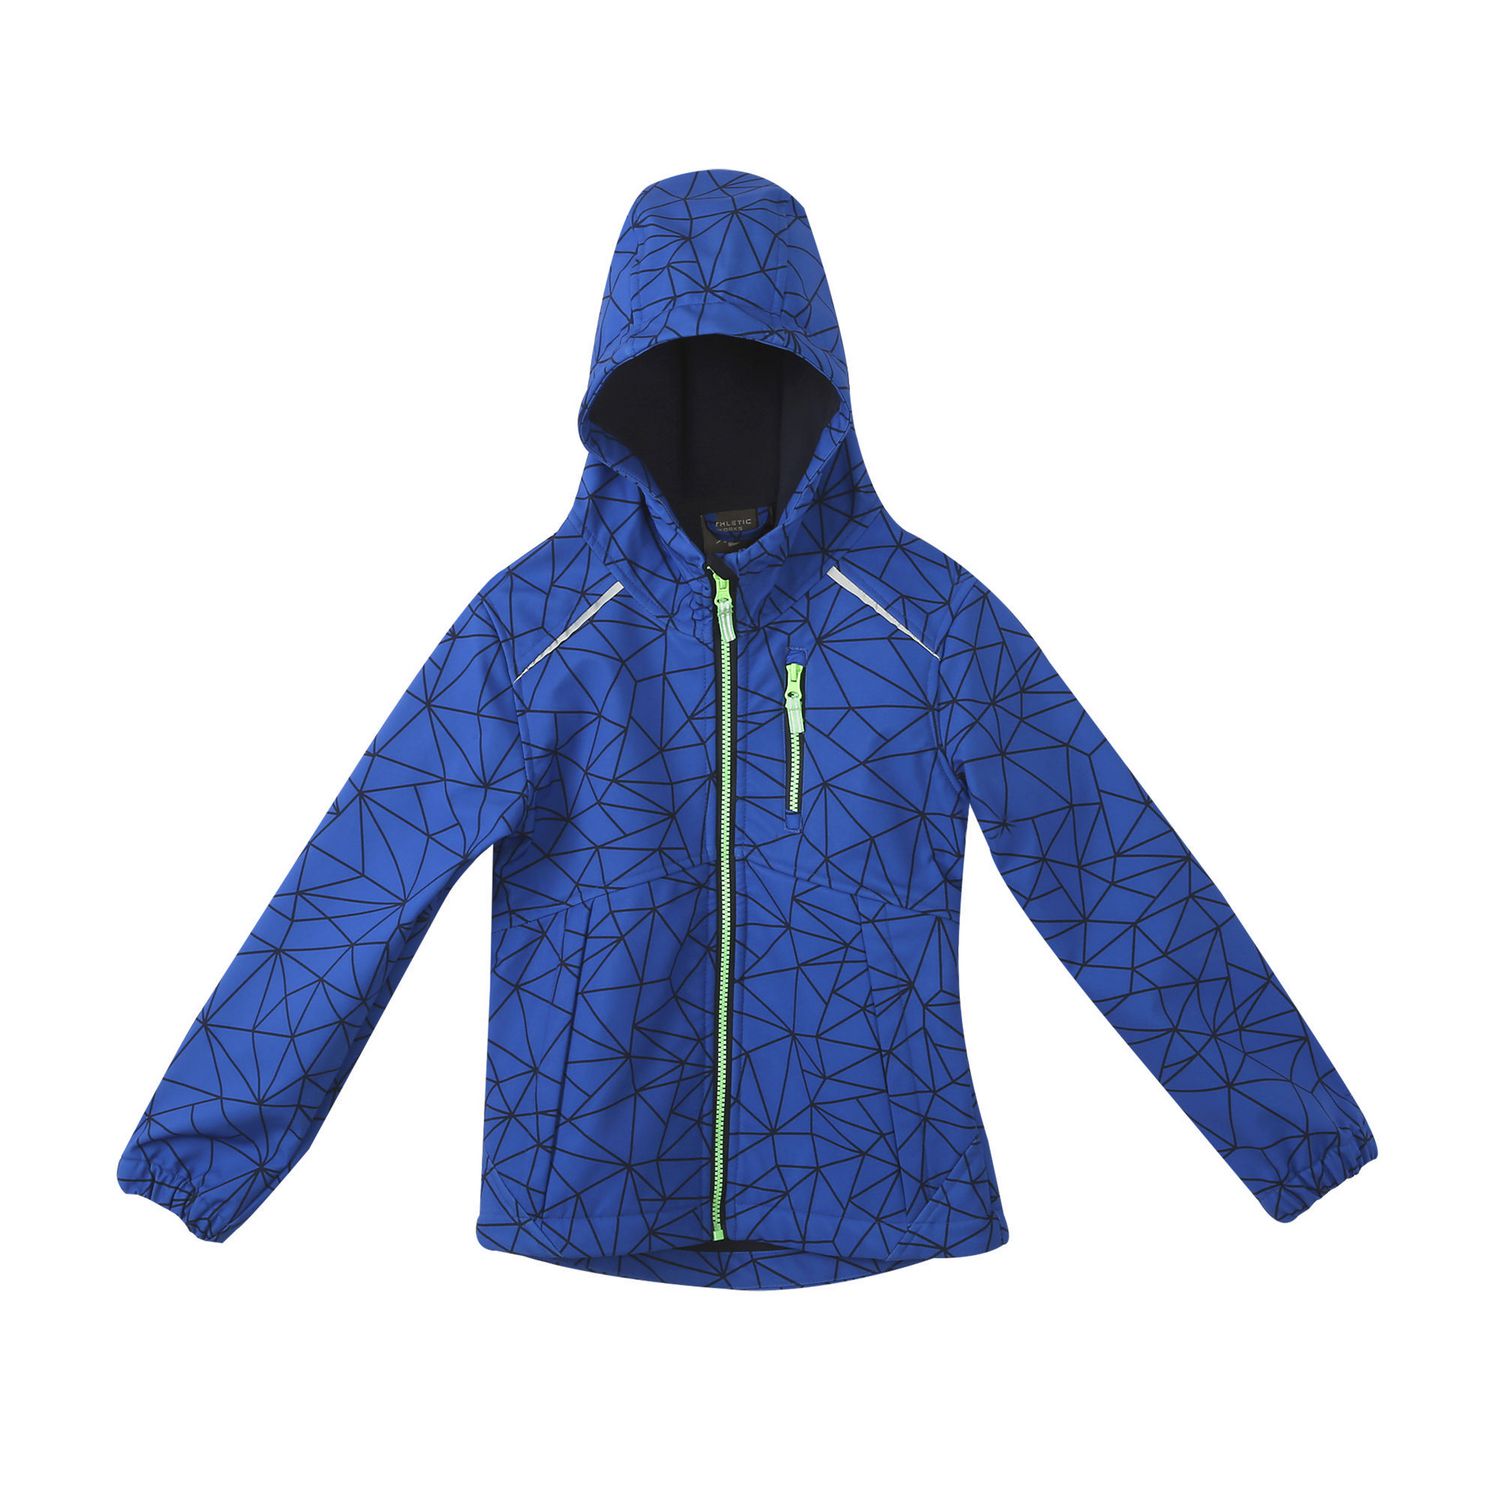 Hurry! Athletic Works Jackets on Sale for as low as $11!